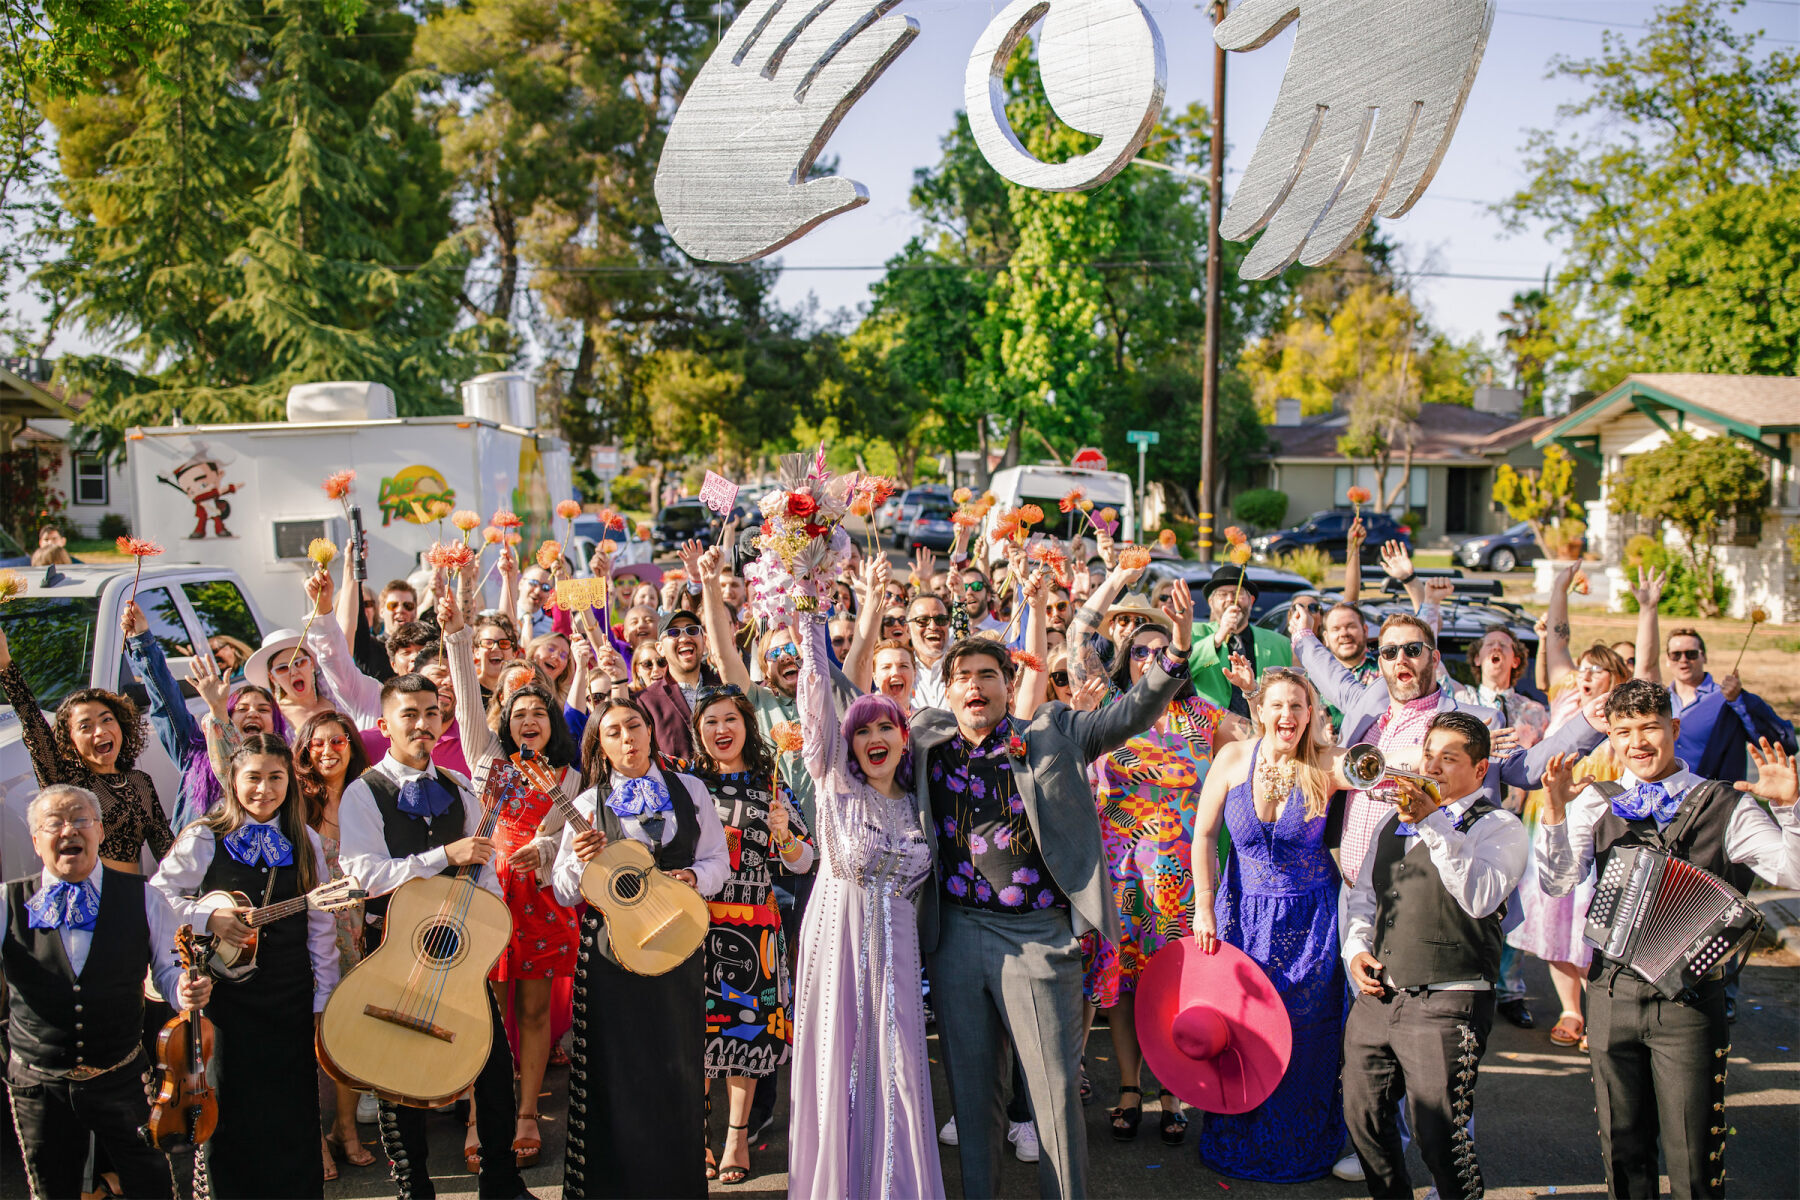 A group photo, including the mariachi band that led guests on a post-ceremony parade at a vibrant, outdoor wedding, was snapped when everyone got back to the wedding venue.